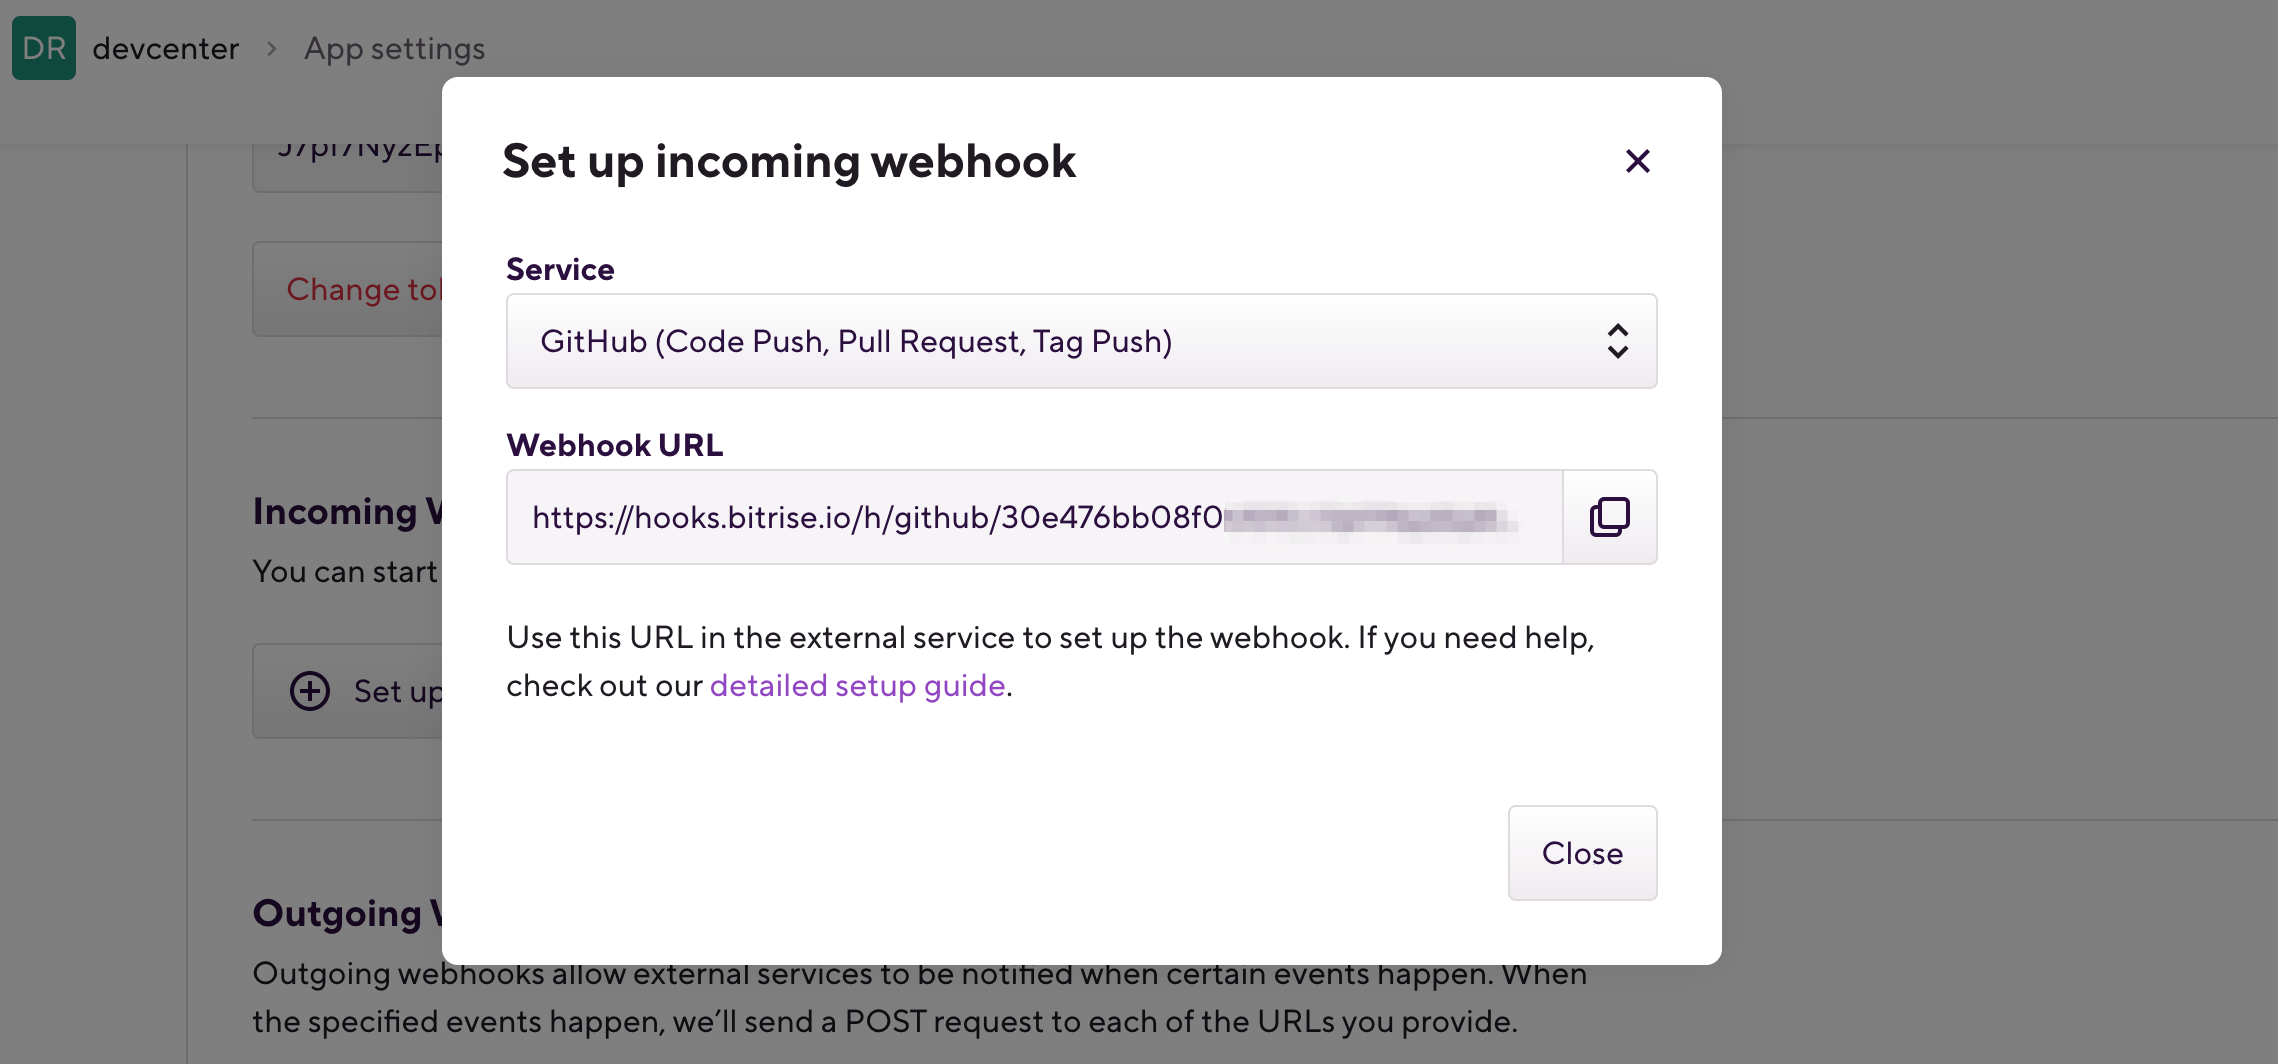 apps-webhooks-select.png